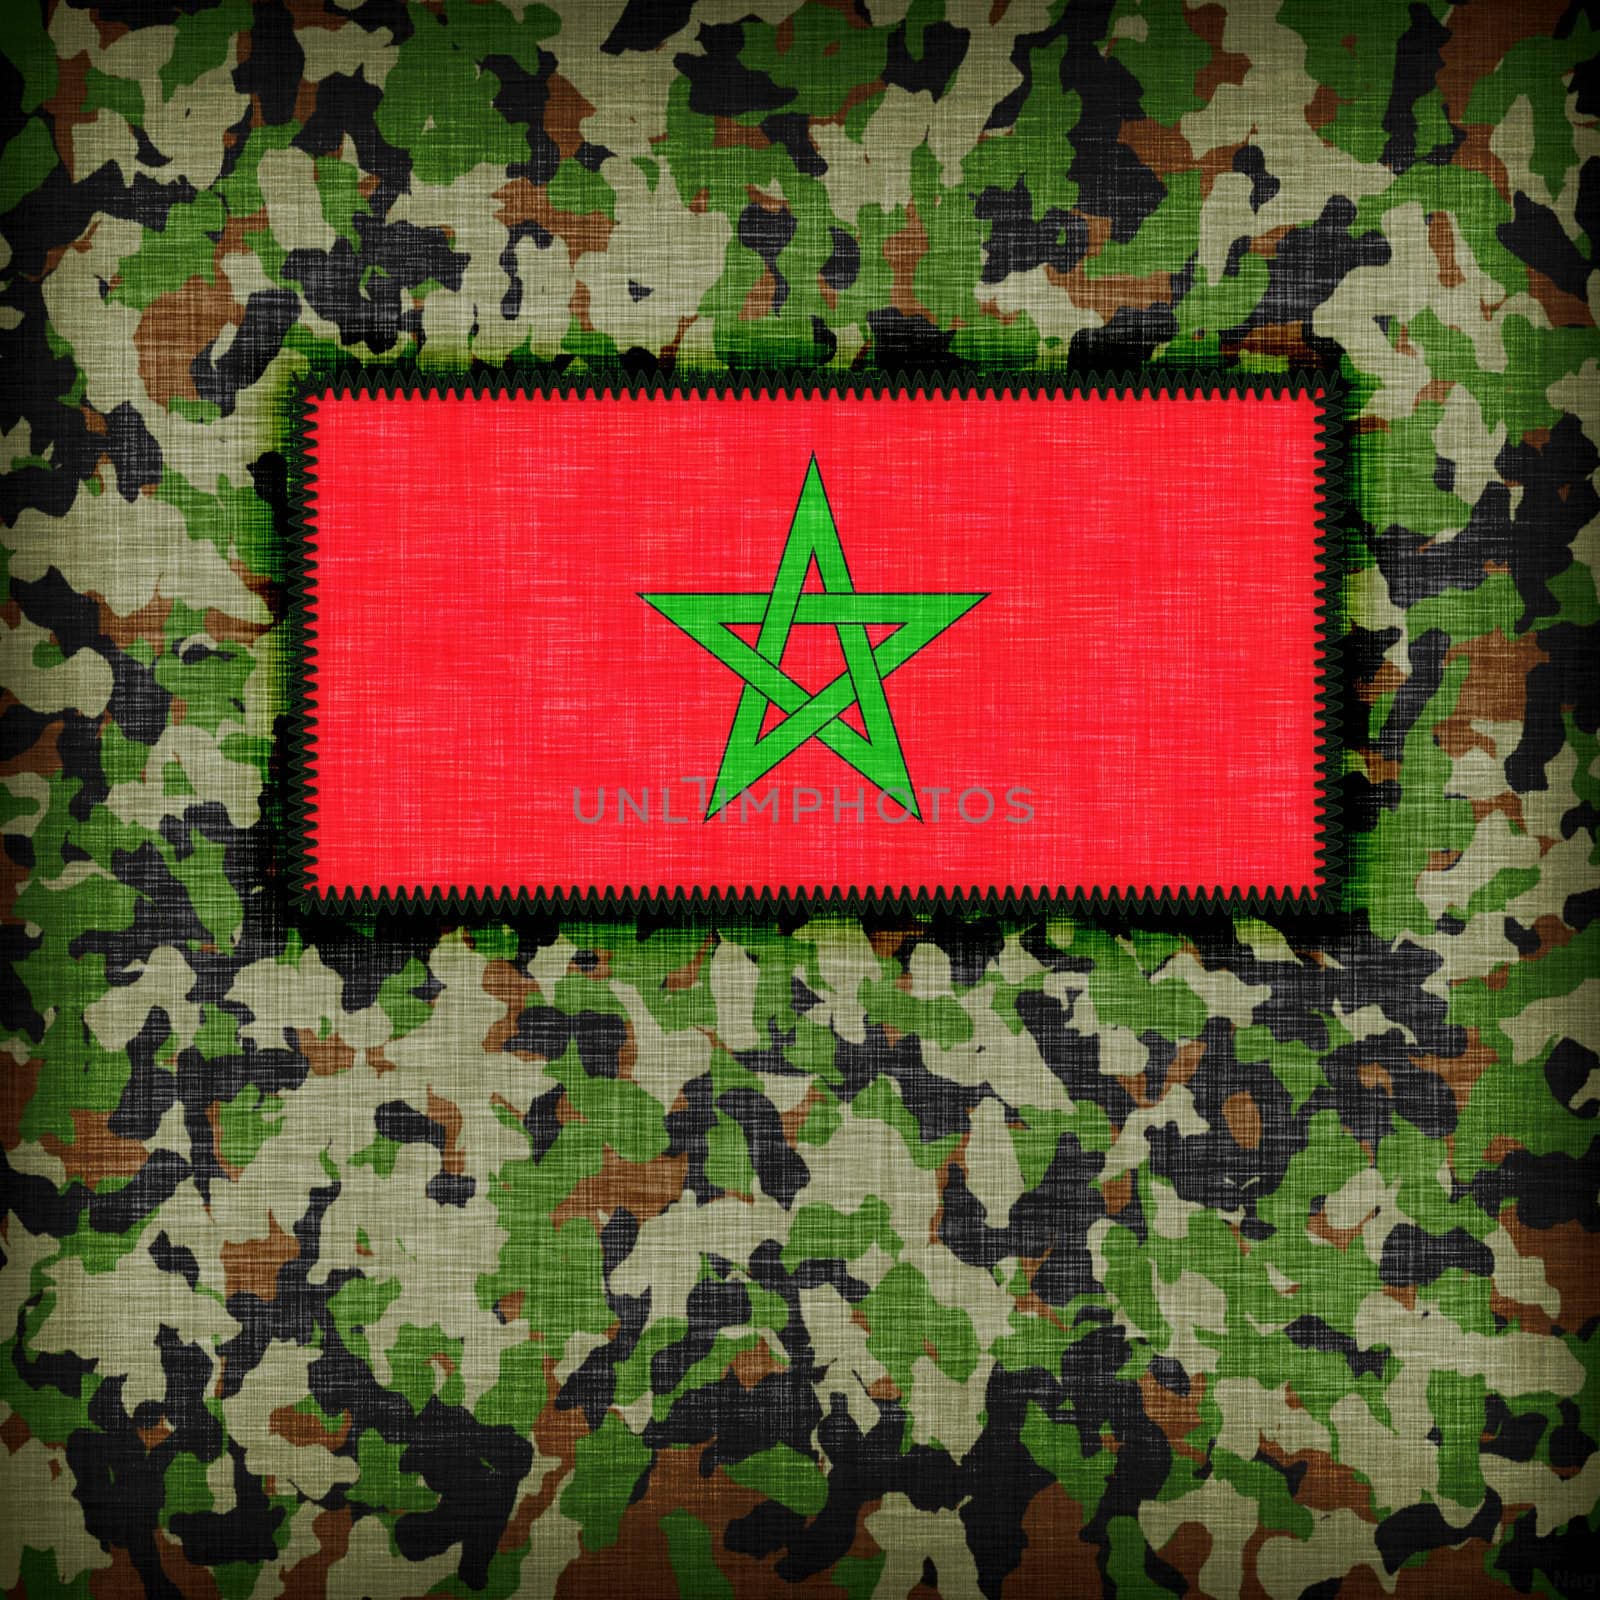 Amy camouflage uniform, Morocco by michaklootwijk